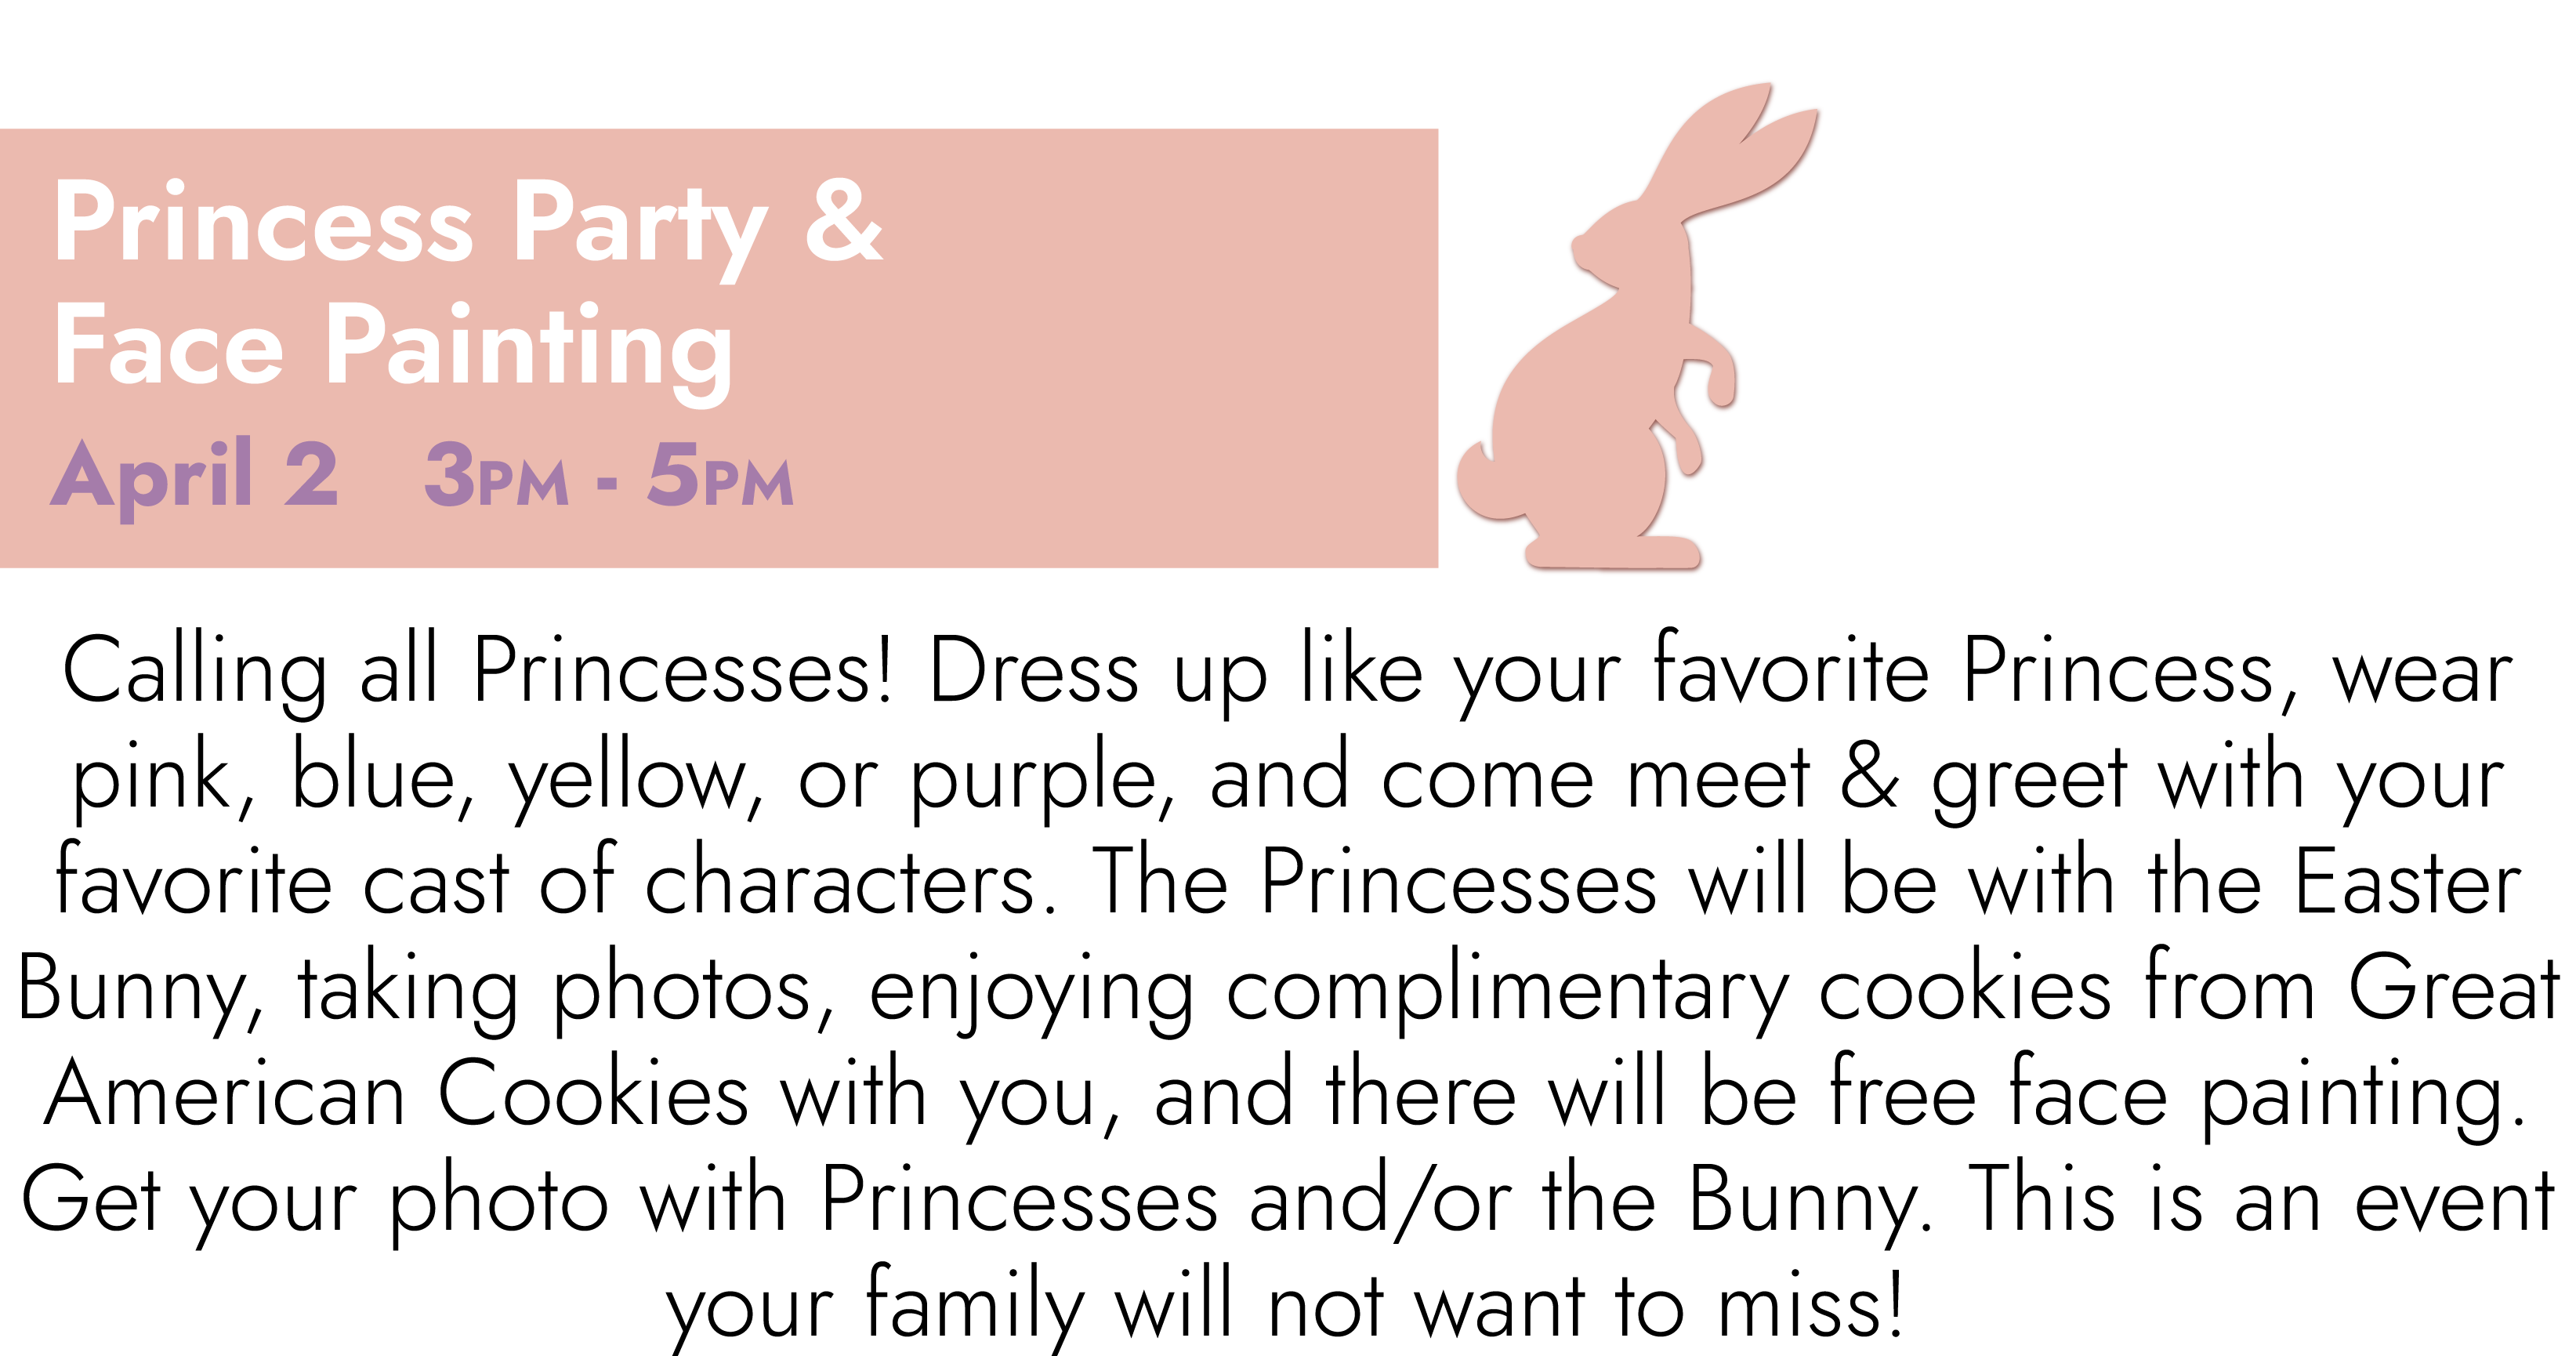 Princess Party & Face Painting April 2 3PM – 5PM Calling all Princesses! Dress up like your favorite Princess, wear pink, blue, yellow, or purple, and come meet & greet with your favorite cast of characters. The Princesses will be with the Easter Bunny, taking photos, enjoying complimentary cookies from Great American Cookies with you, and there will be free face painting. Get your photo with Princesses and/or the Bunny. This is an event your family will not want to miss!